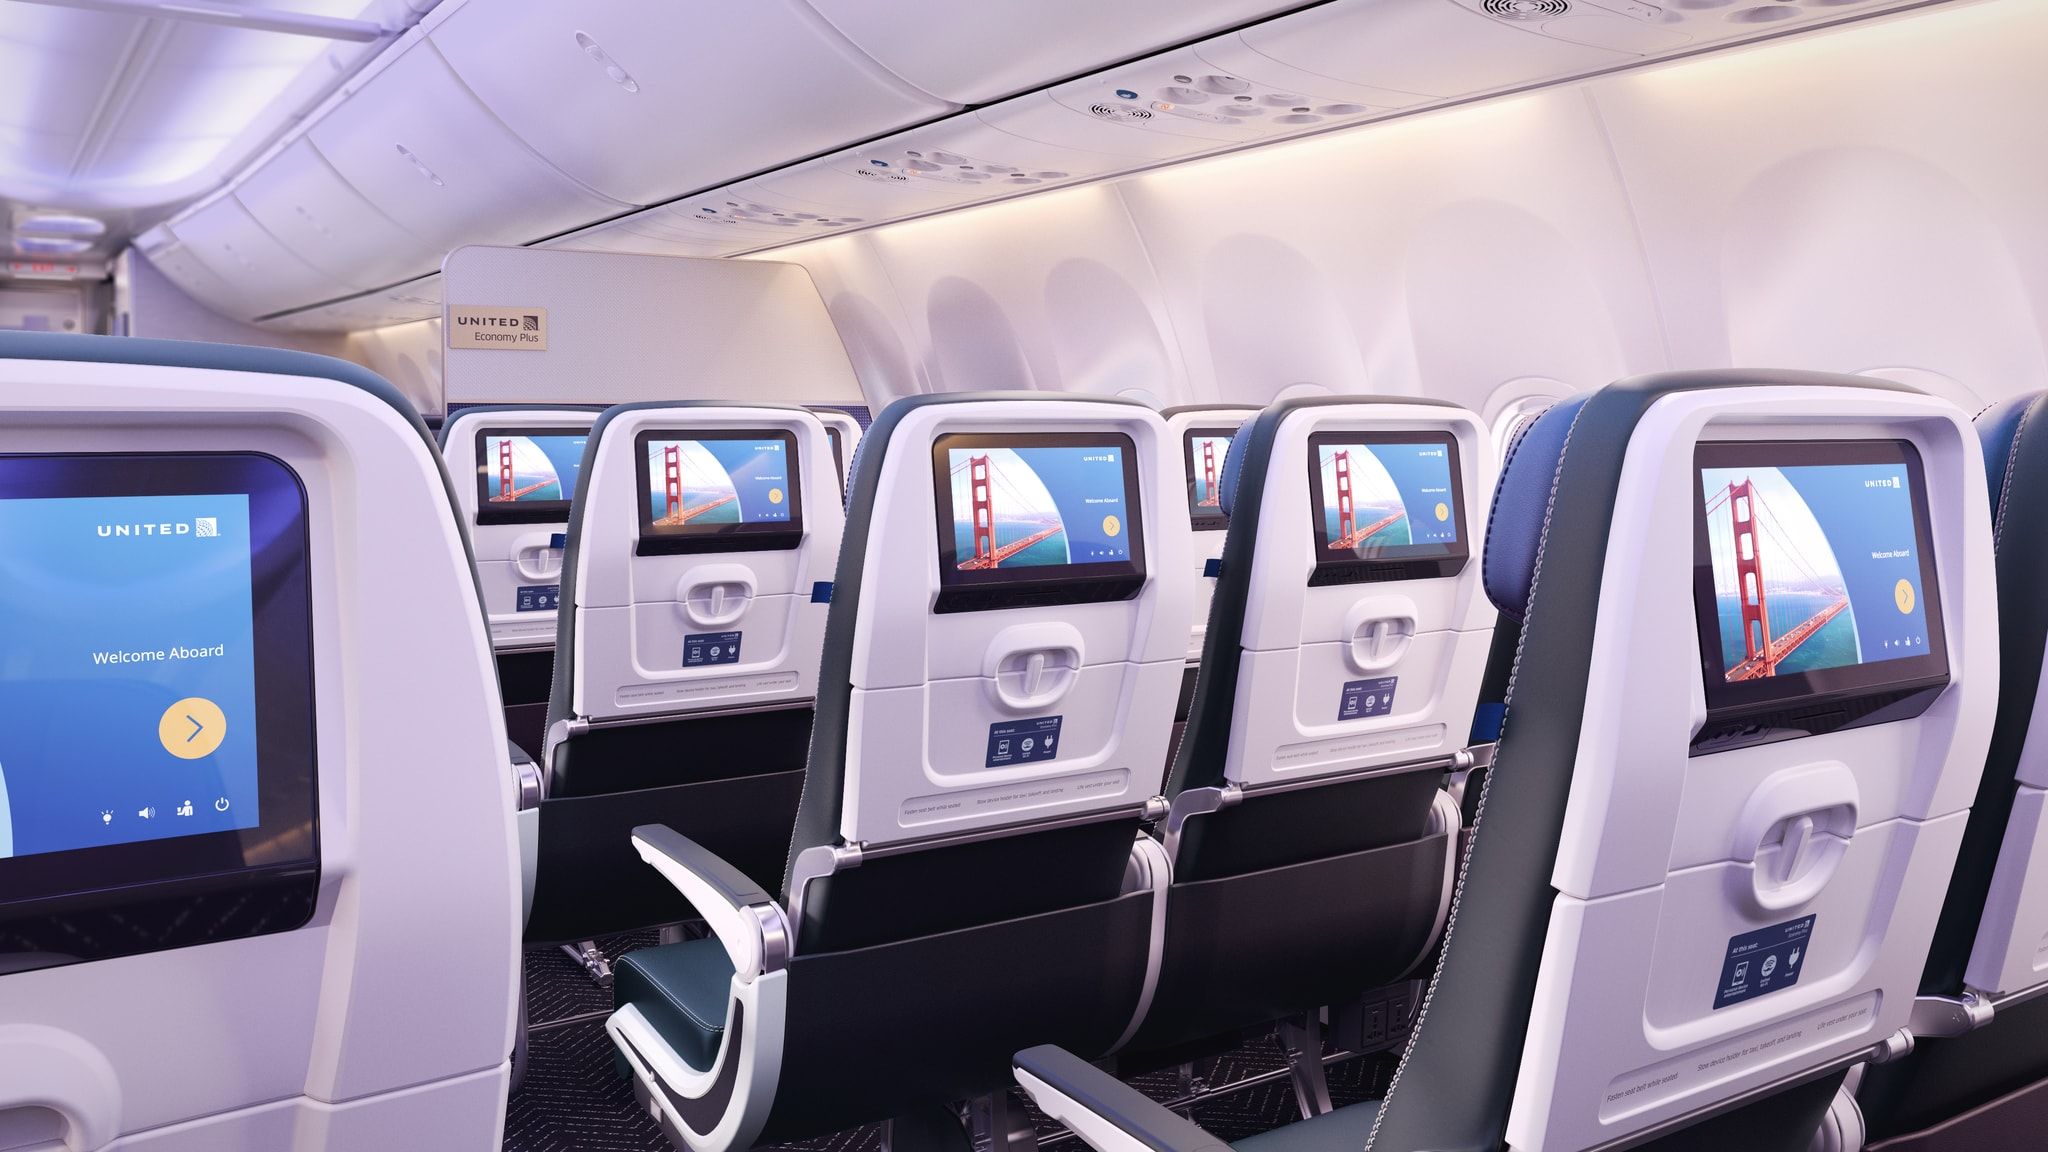 Entertainment screens installed in the seat backs in the economy cabin of an aircraft